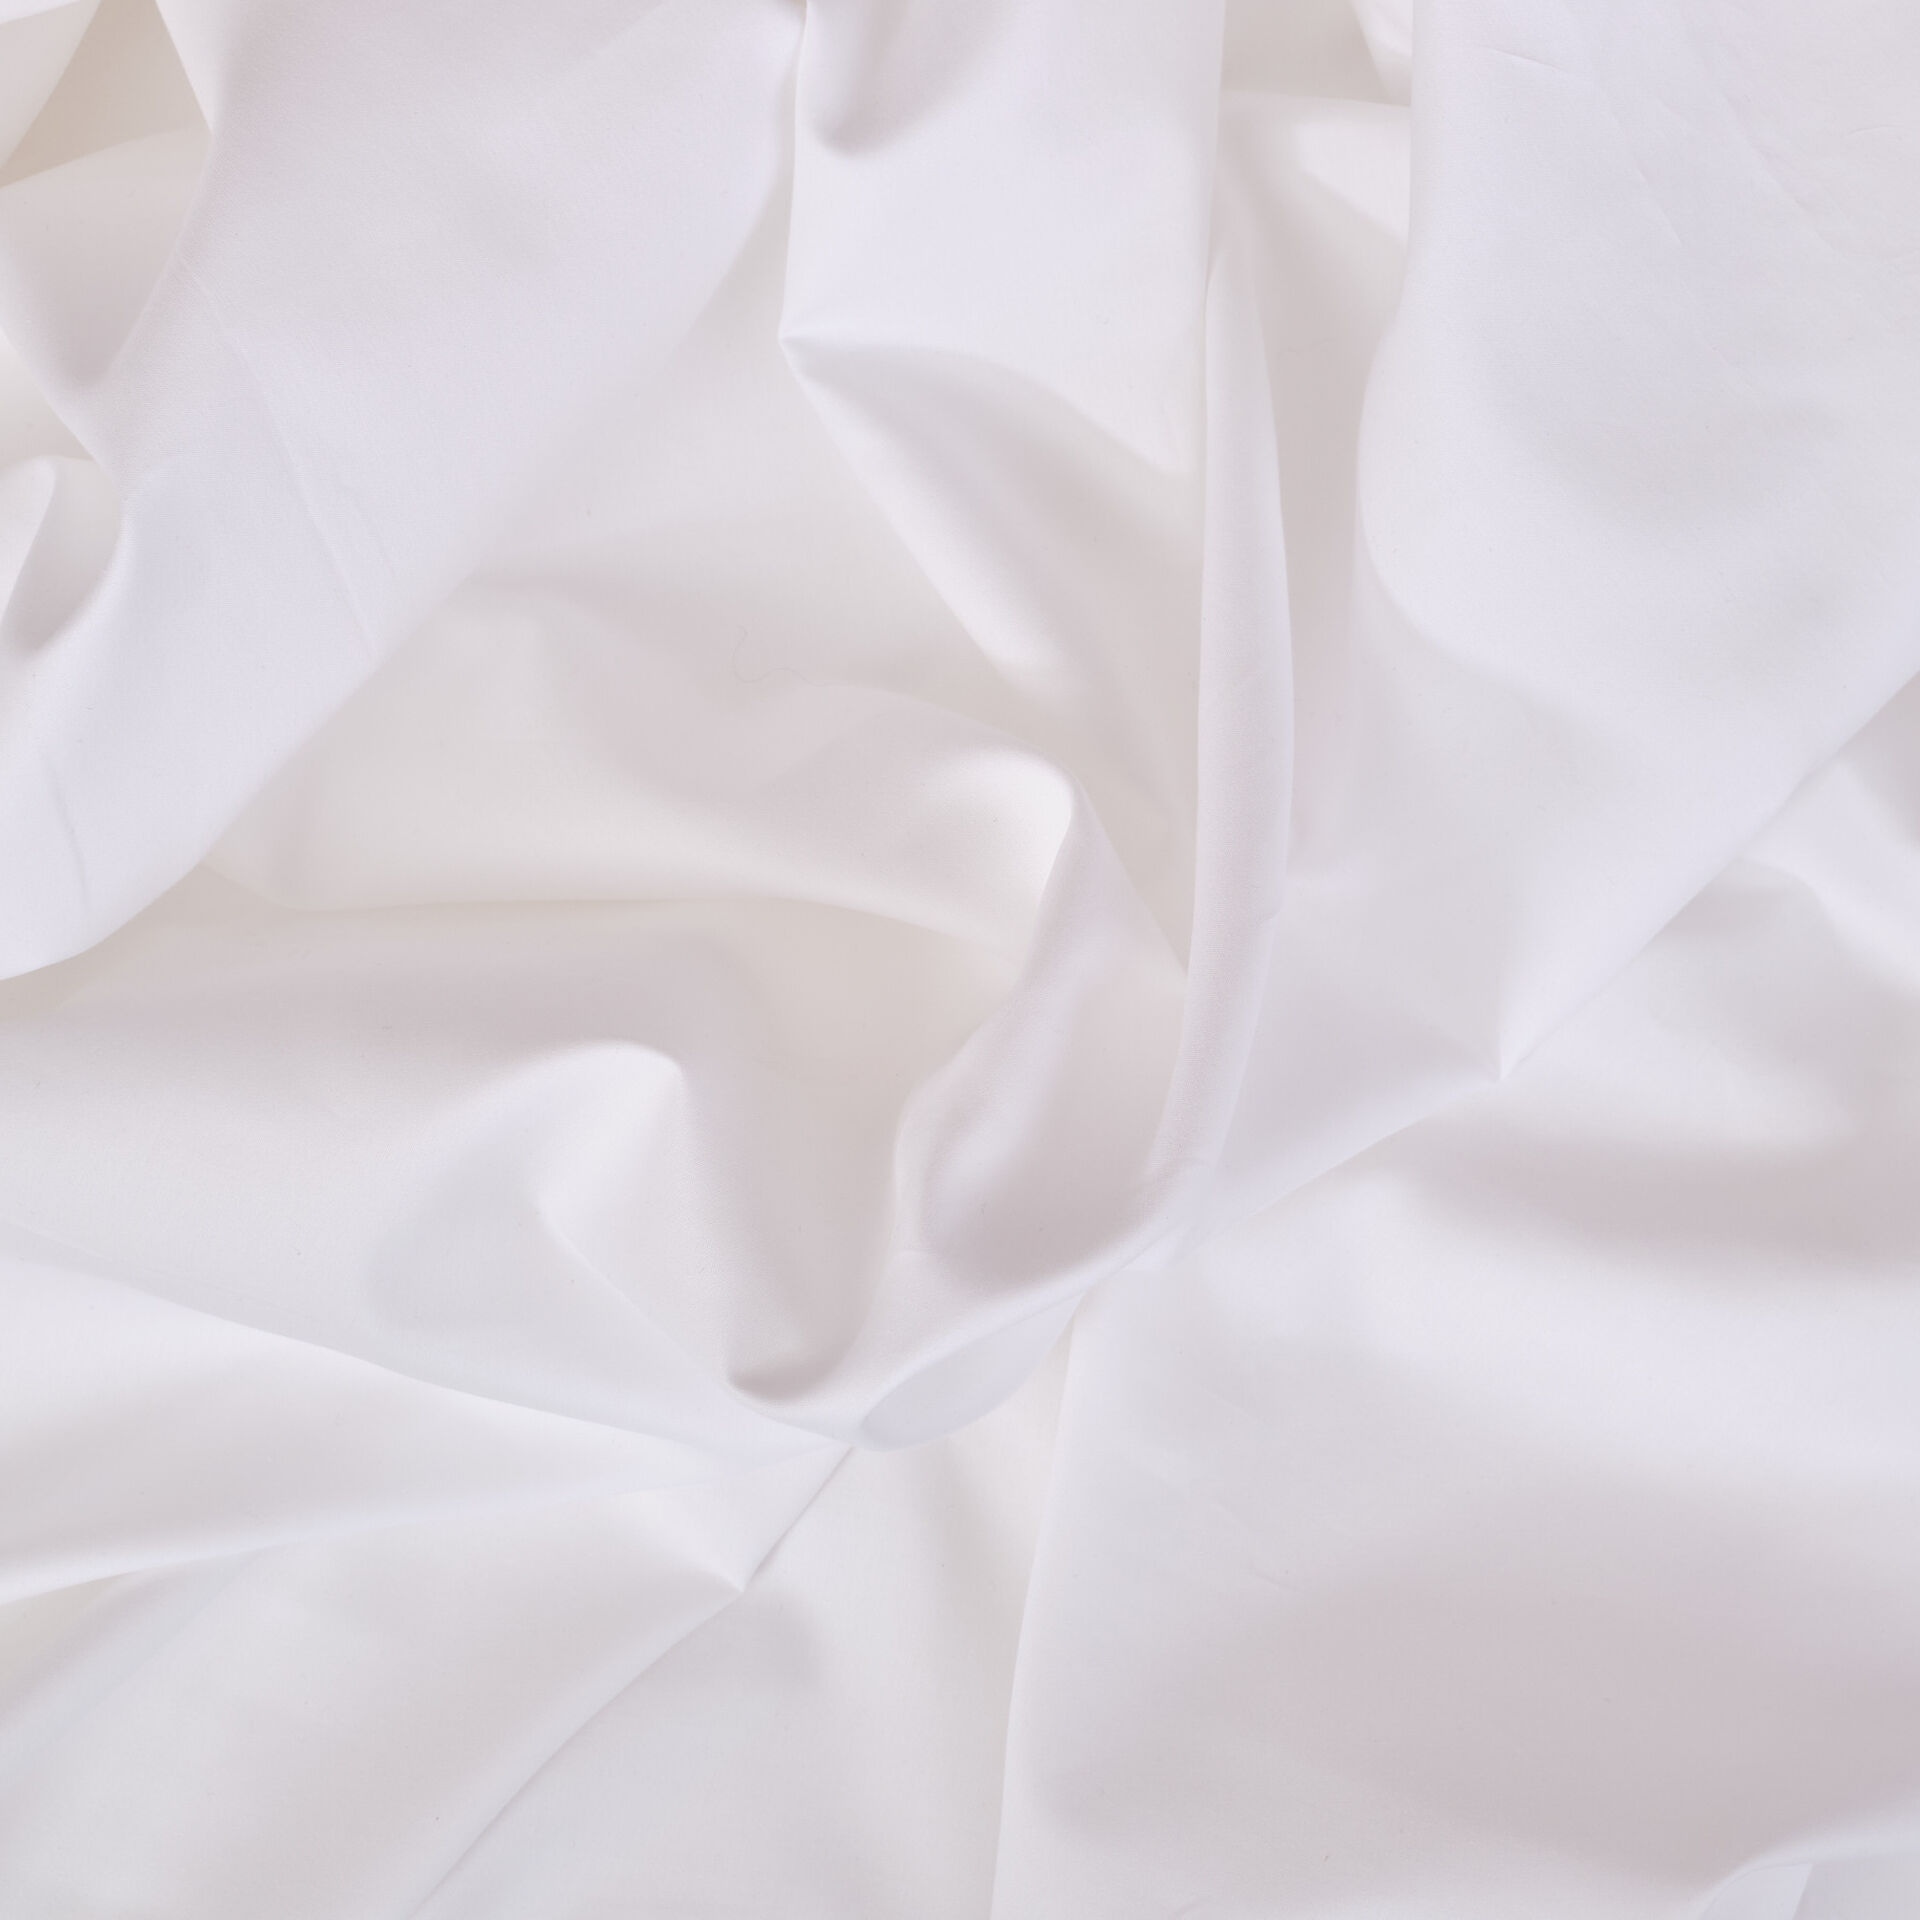 ${product-id}-Valentina Egyptian Cotton Deep Fitted Sheet In White 600 Thread Count-White-${view-type}